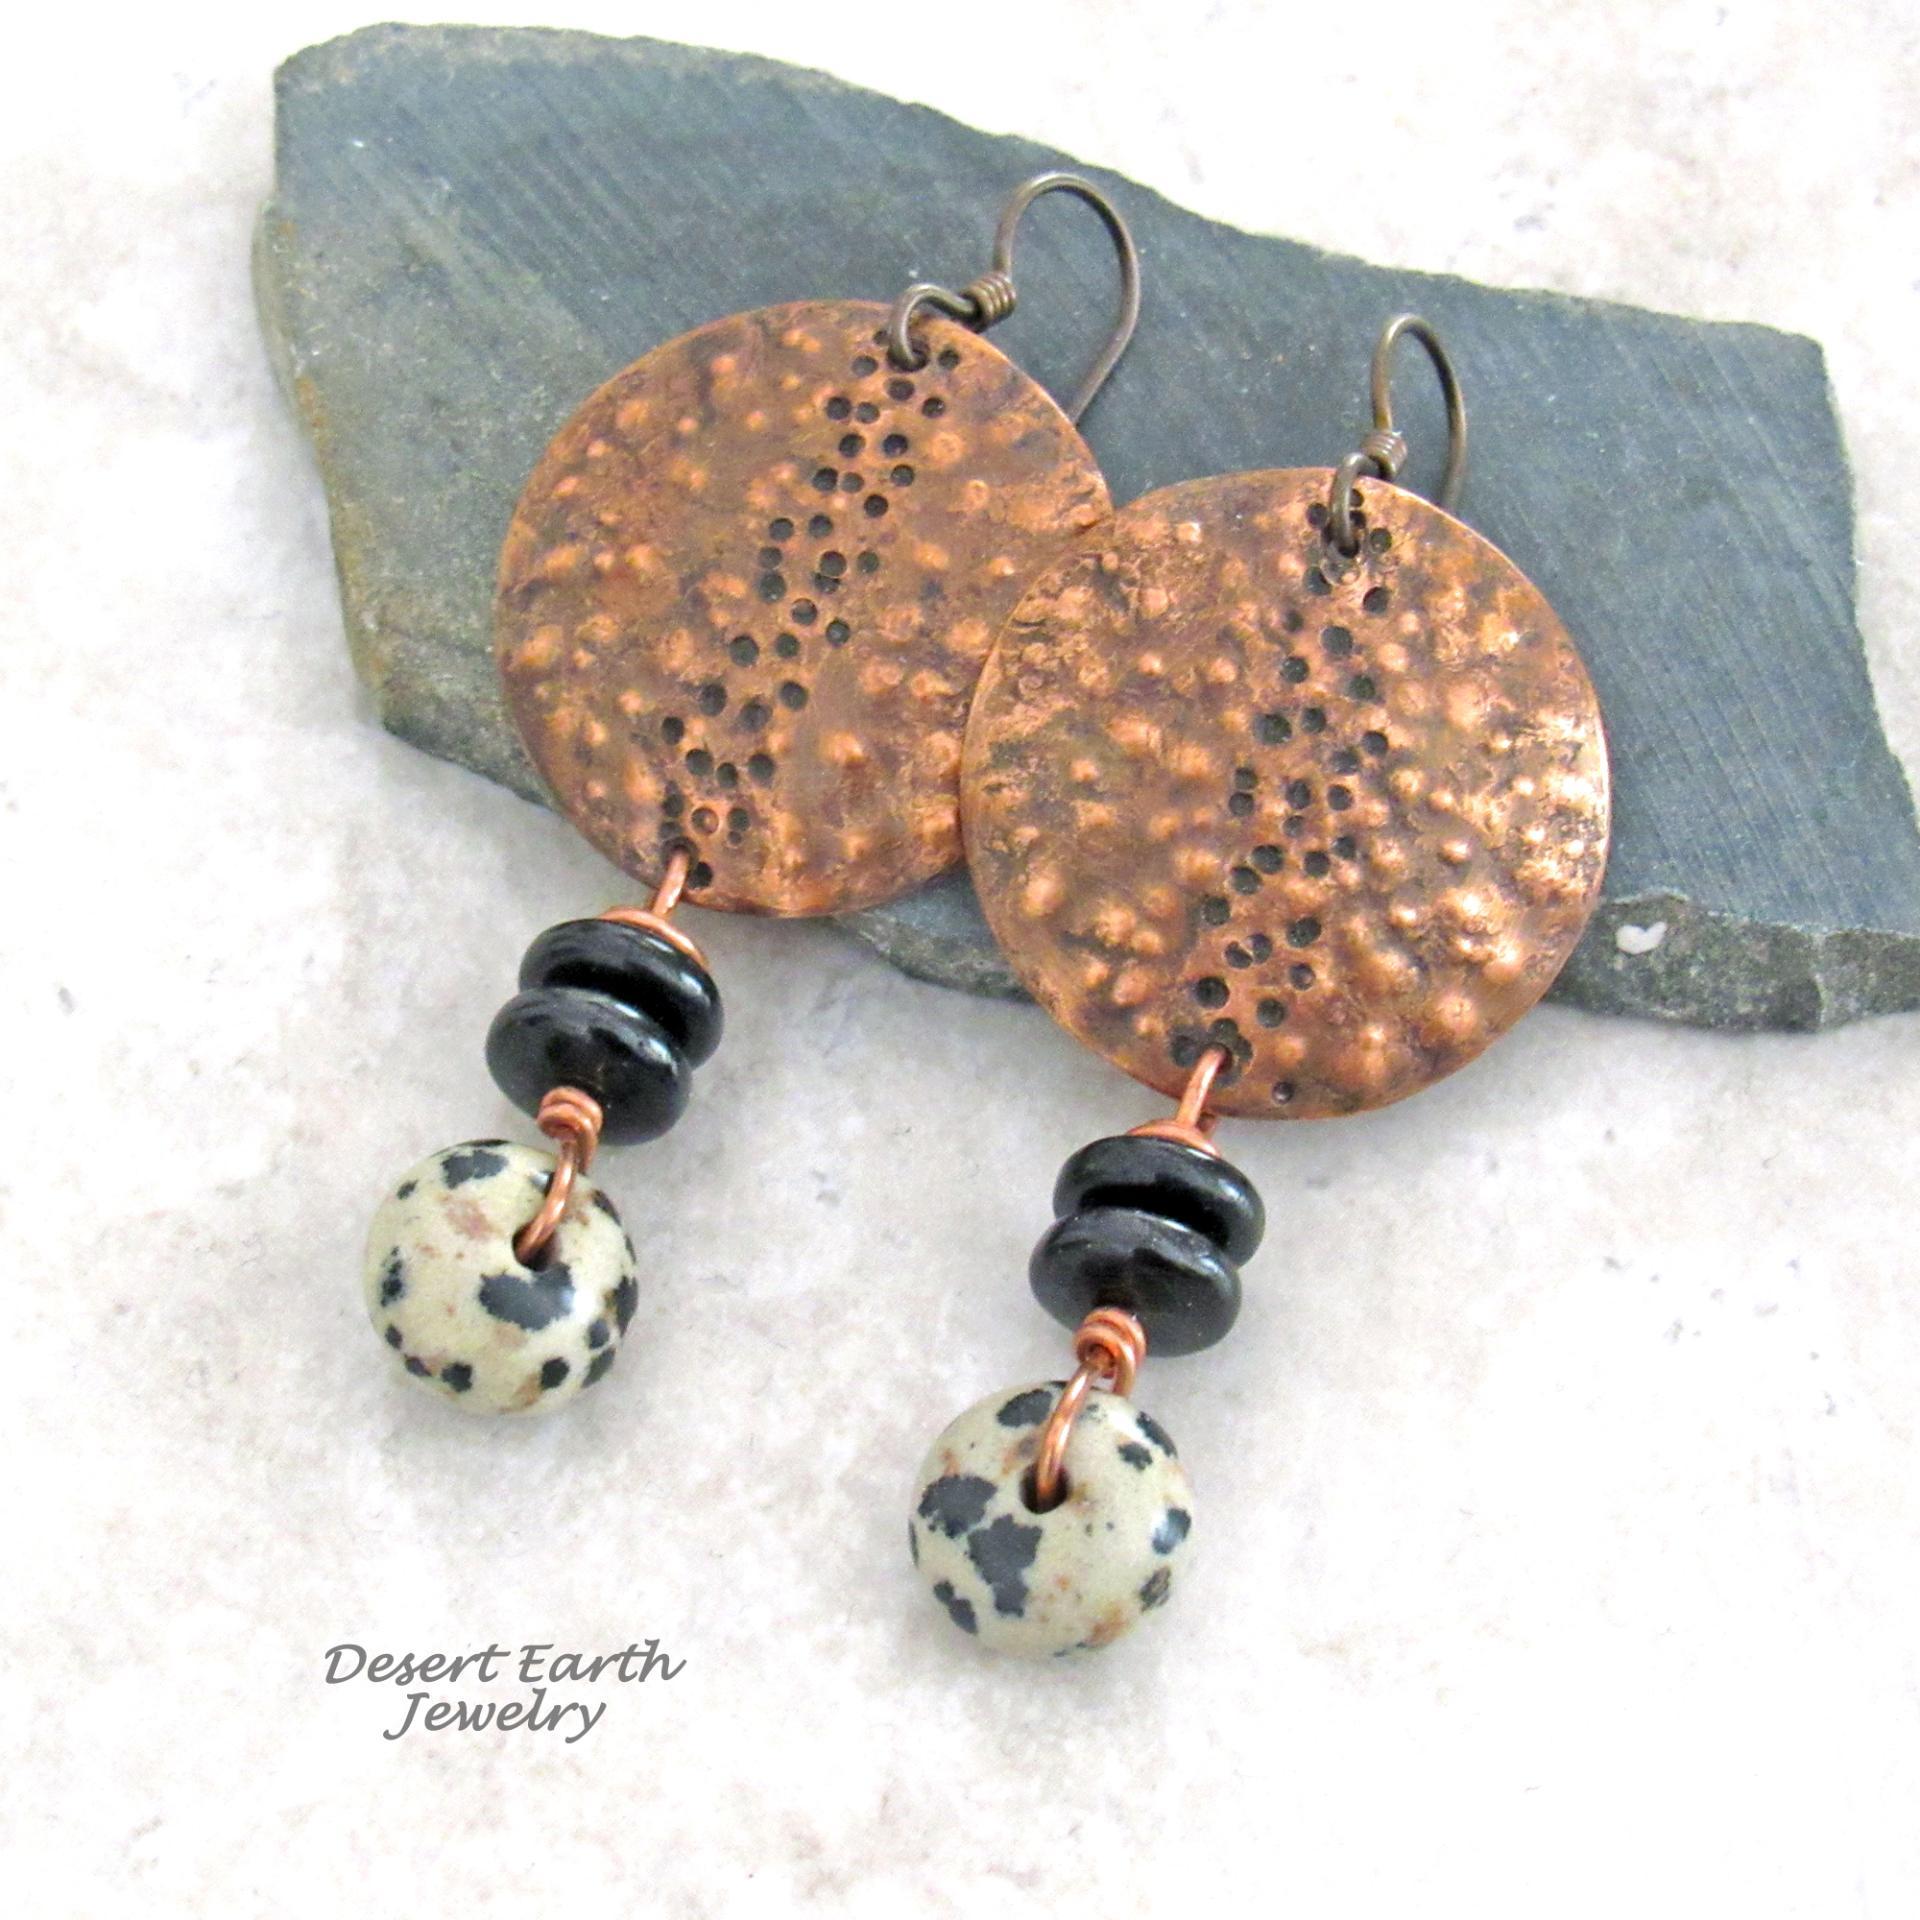 Hammered Copper Earrings with Dalmatian Jasper Stone Dangles - Unique Bohemian Tribal Style Jewelry